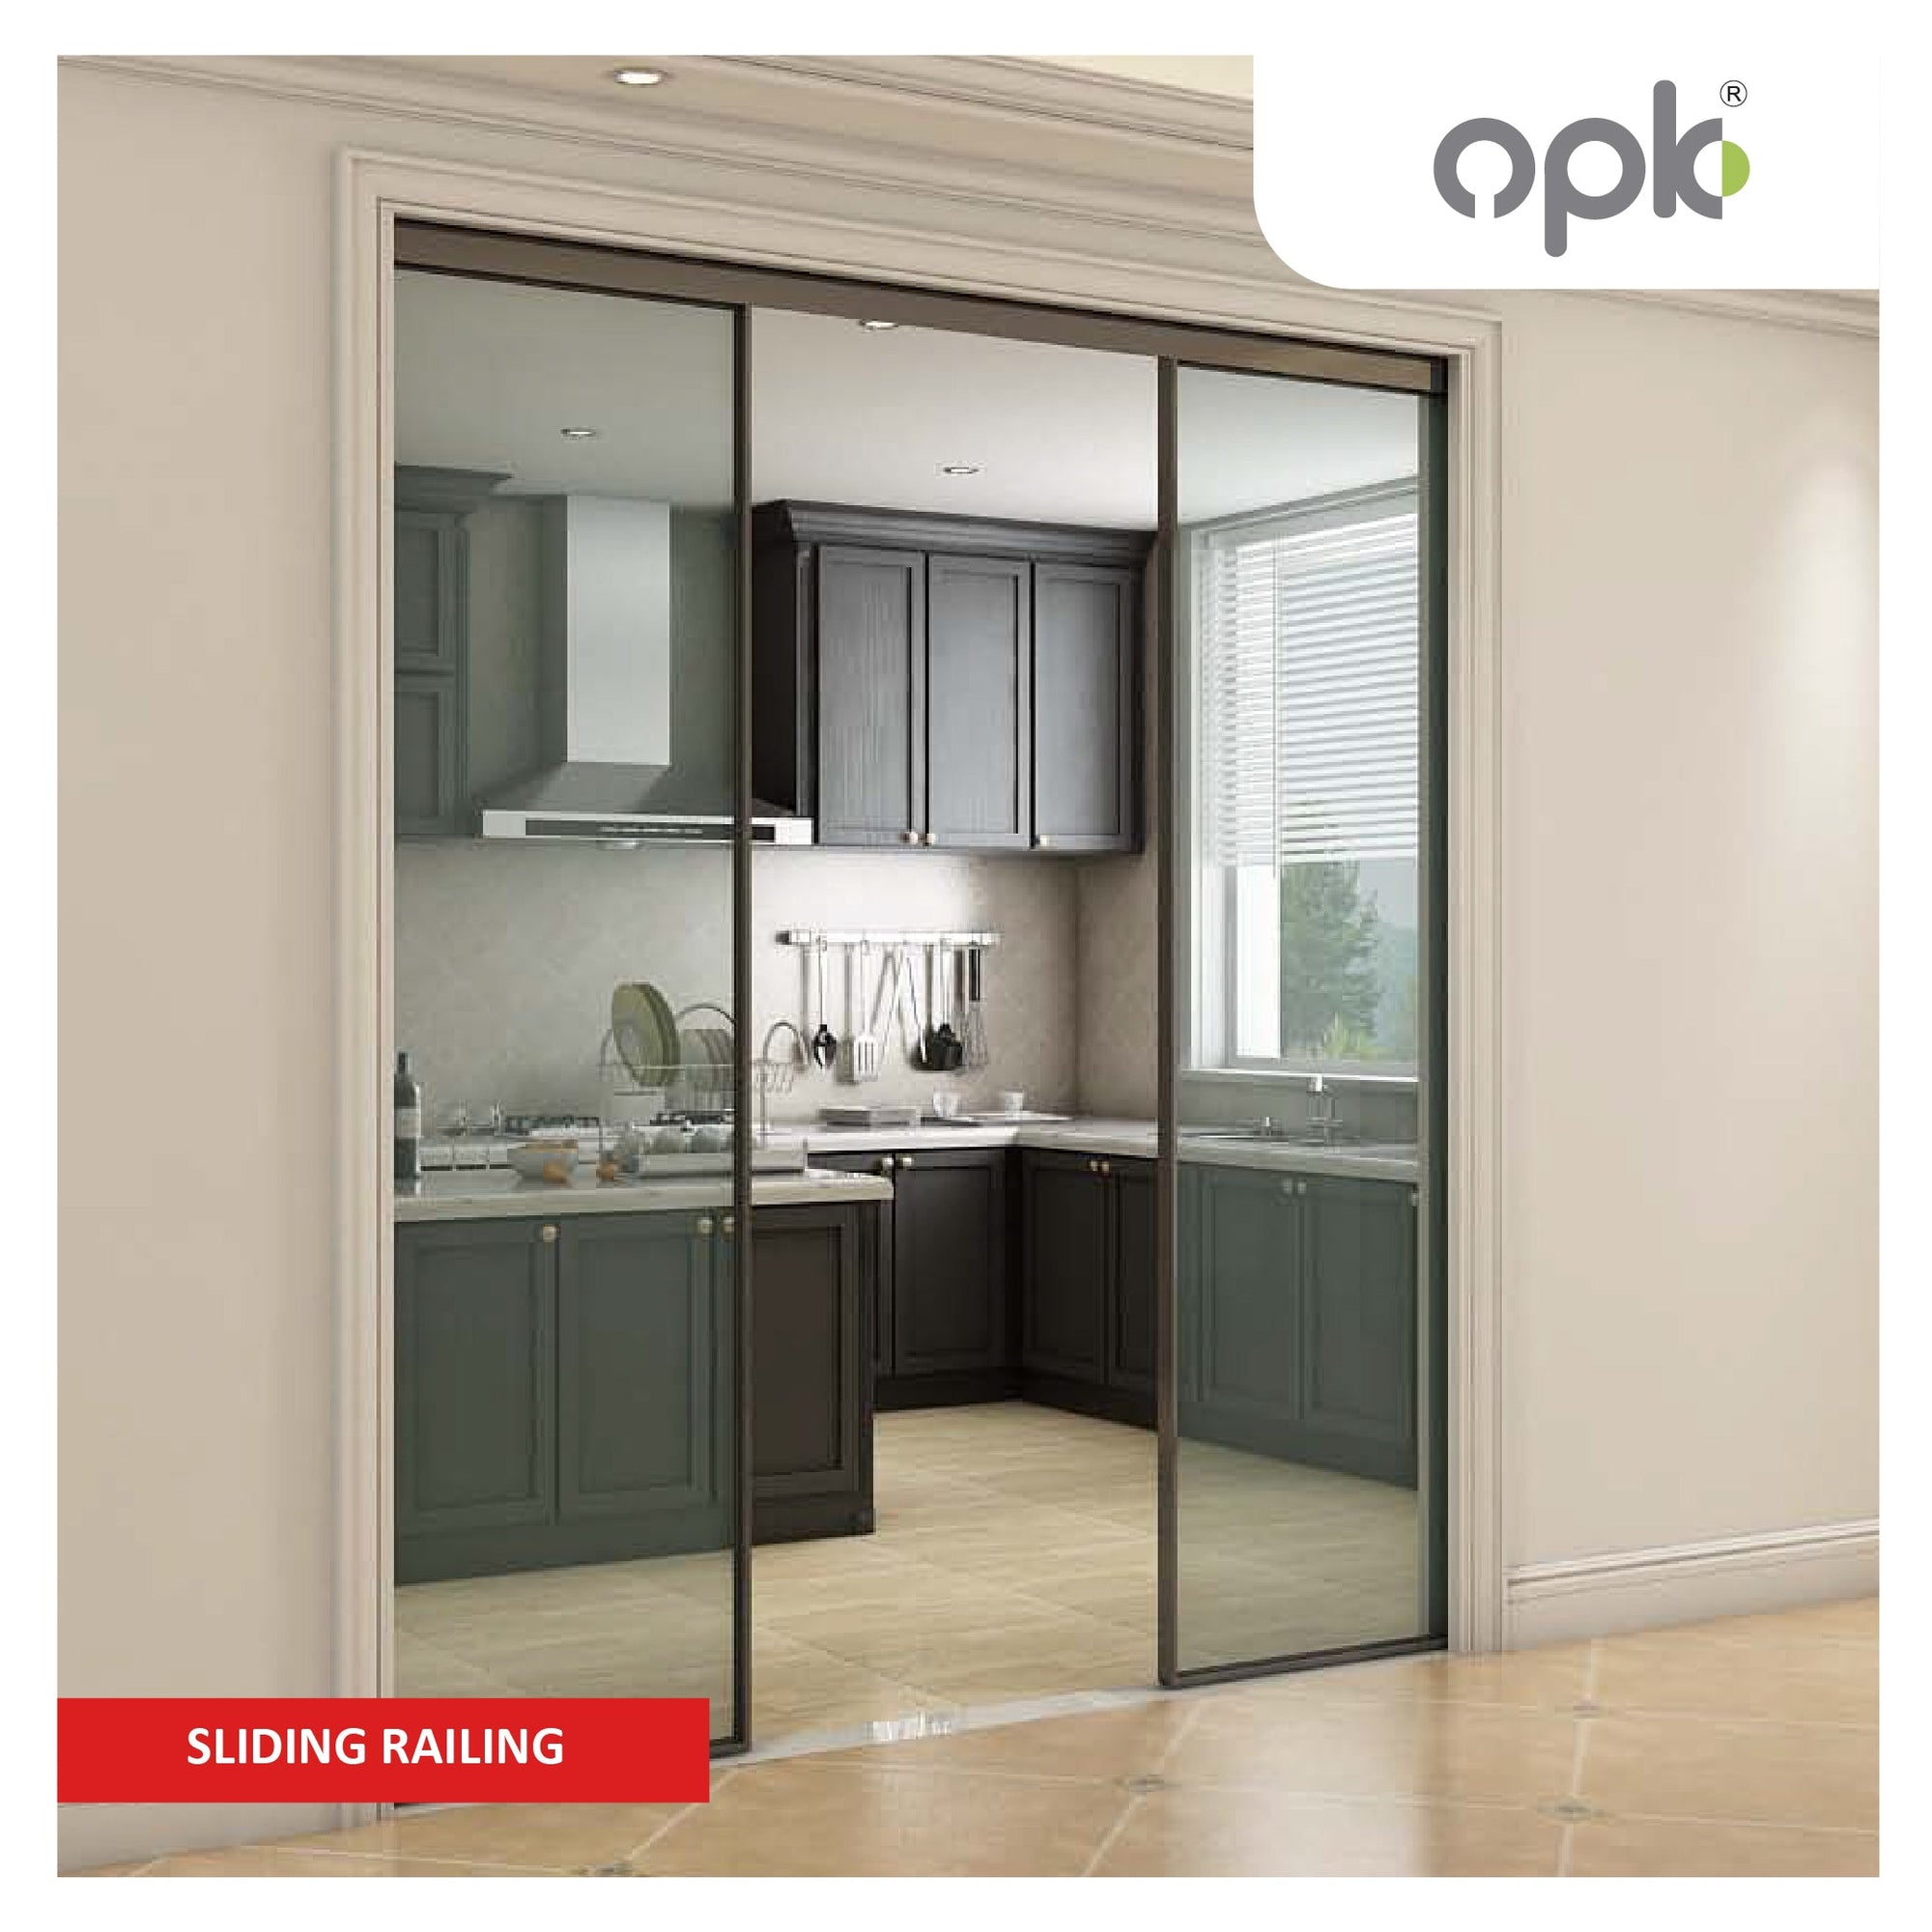 Effortless OPK Sliding Railings by M. M. Noorbhoy & Co - High-quality railings for smooth and reliable sliding functionality in doors and windows.